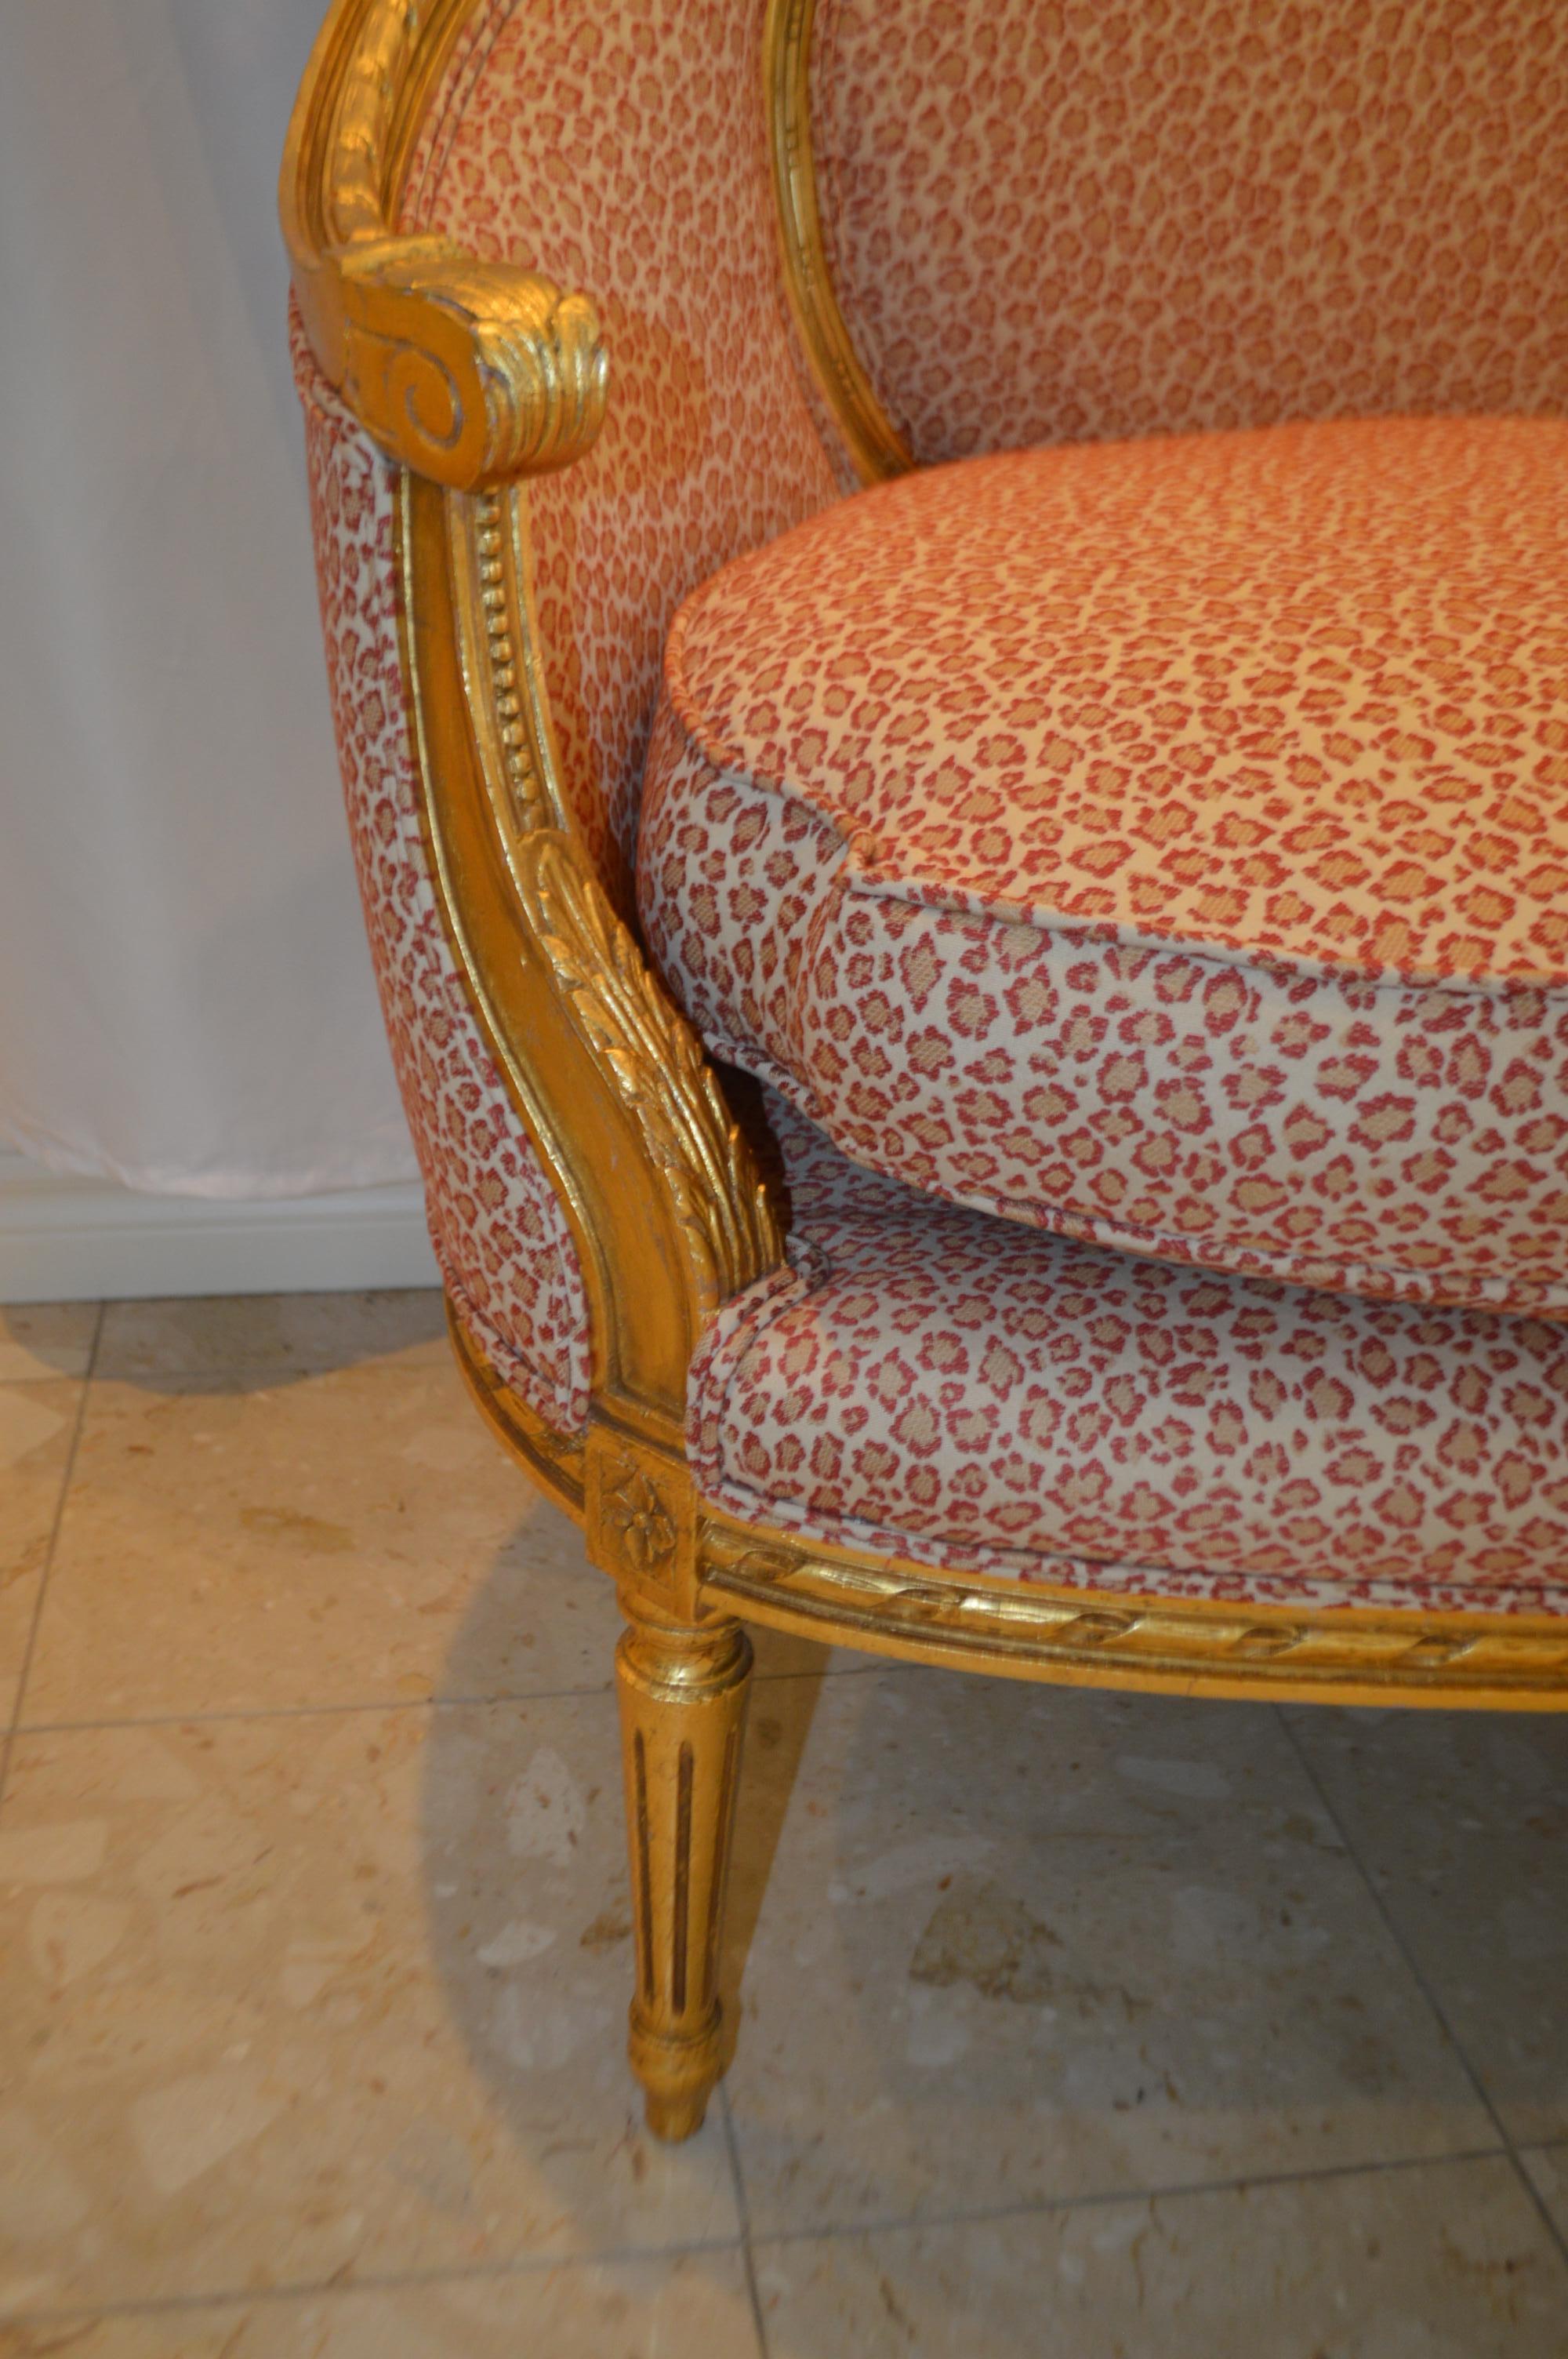 Gilt Louis XVI style gilded settee with pink and cream fabric.